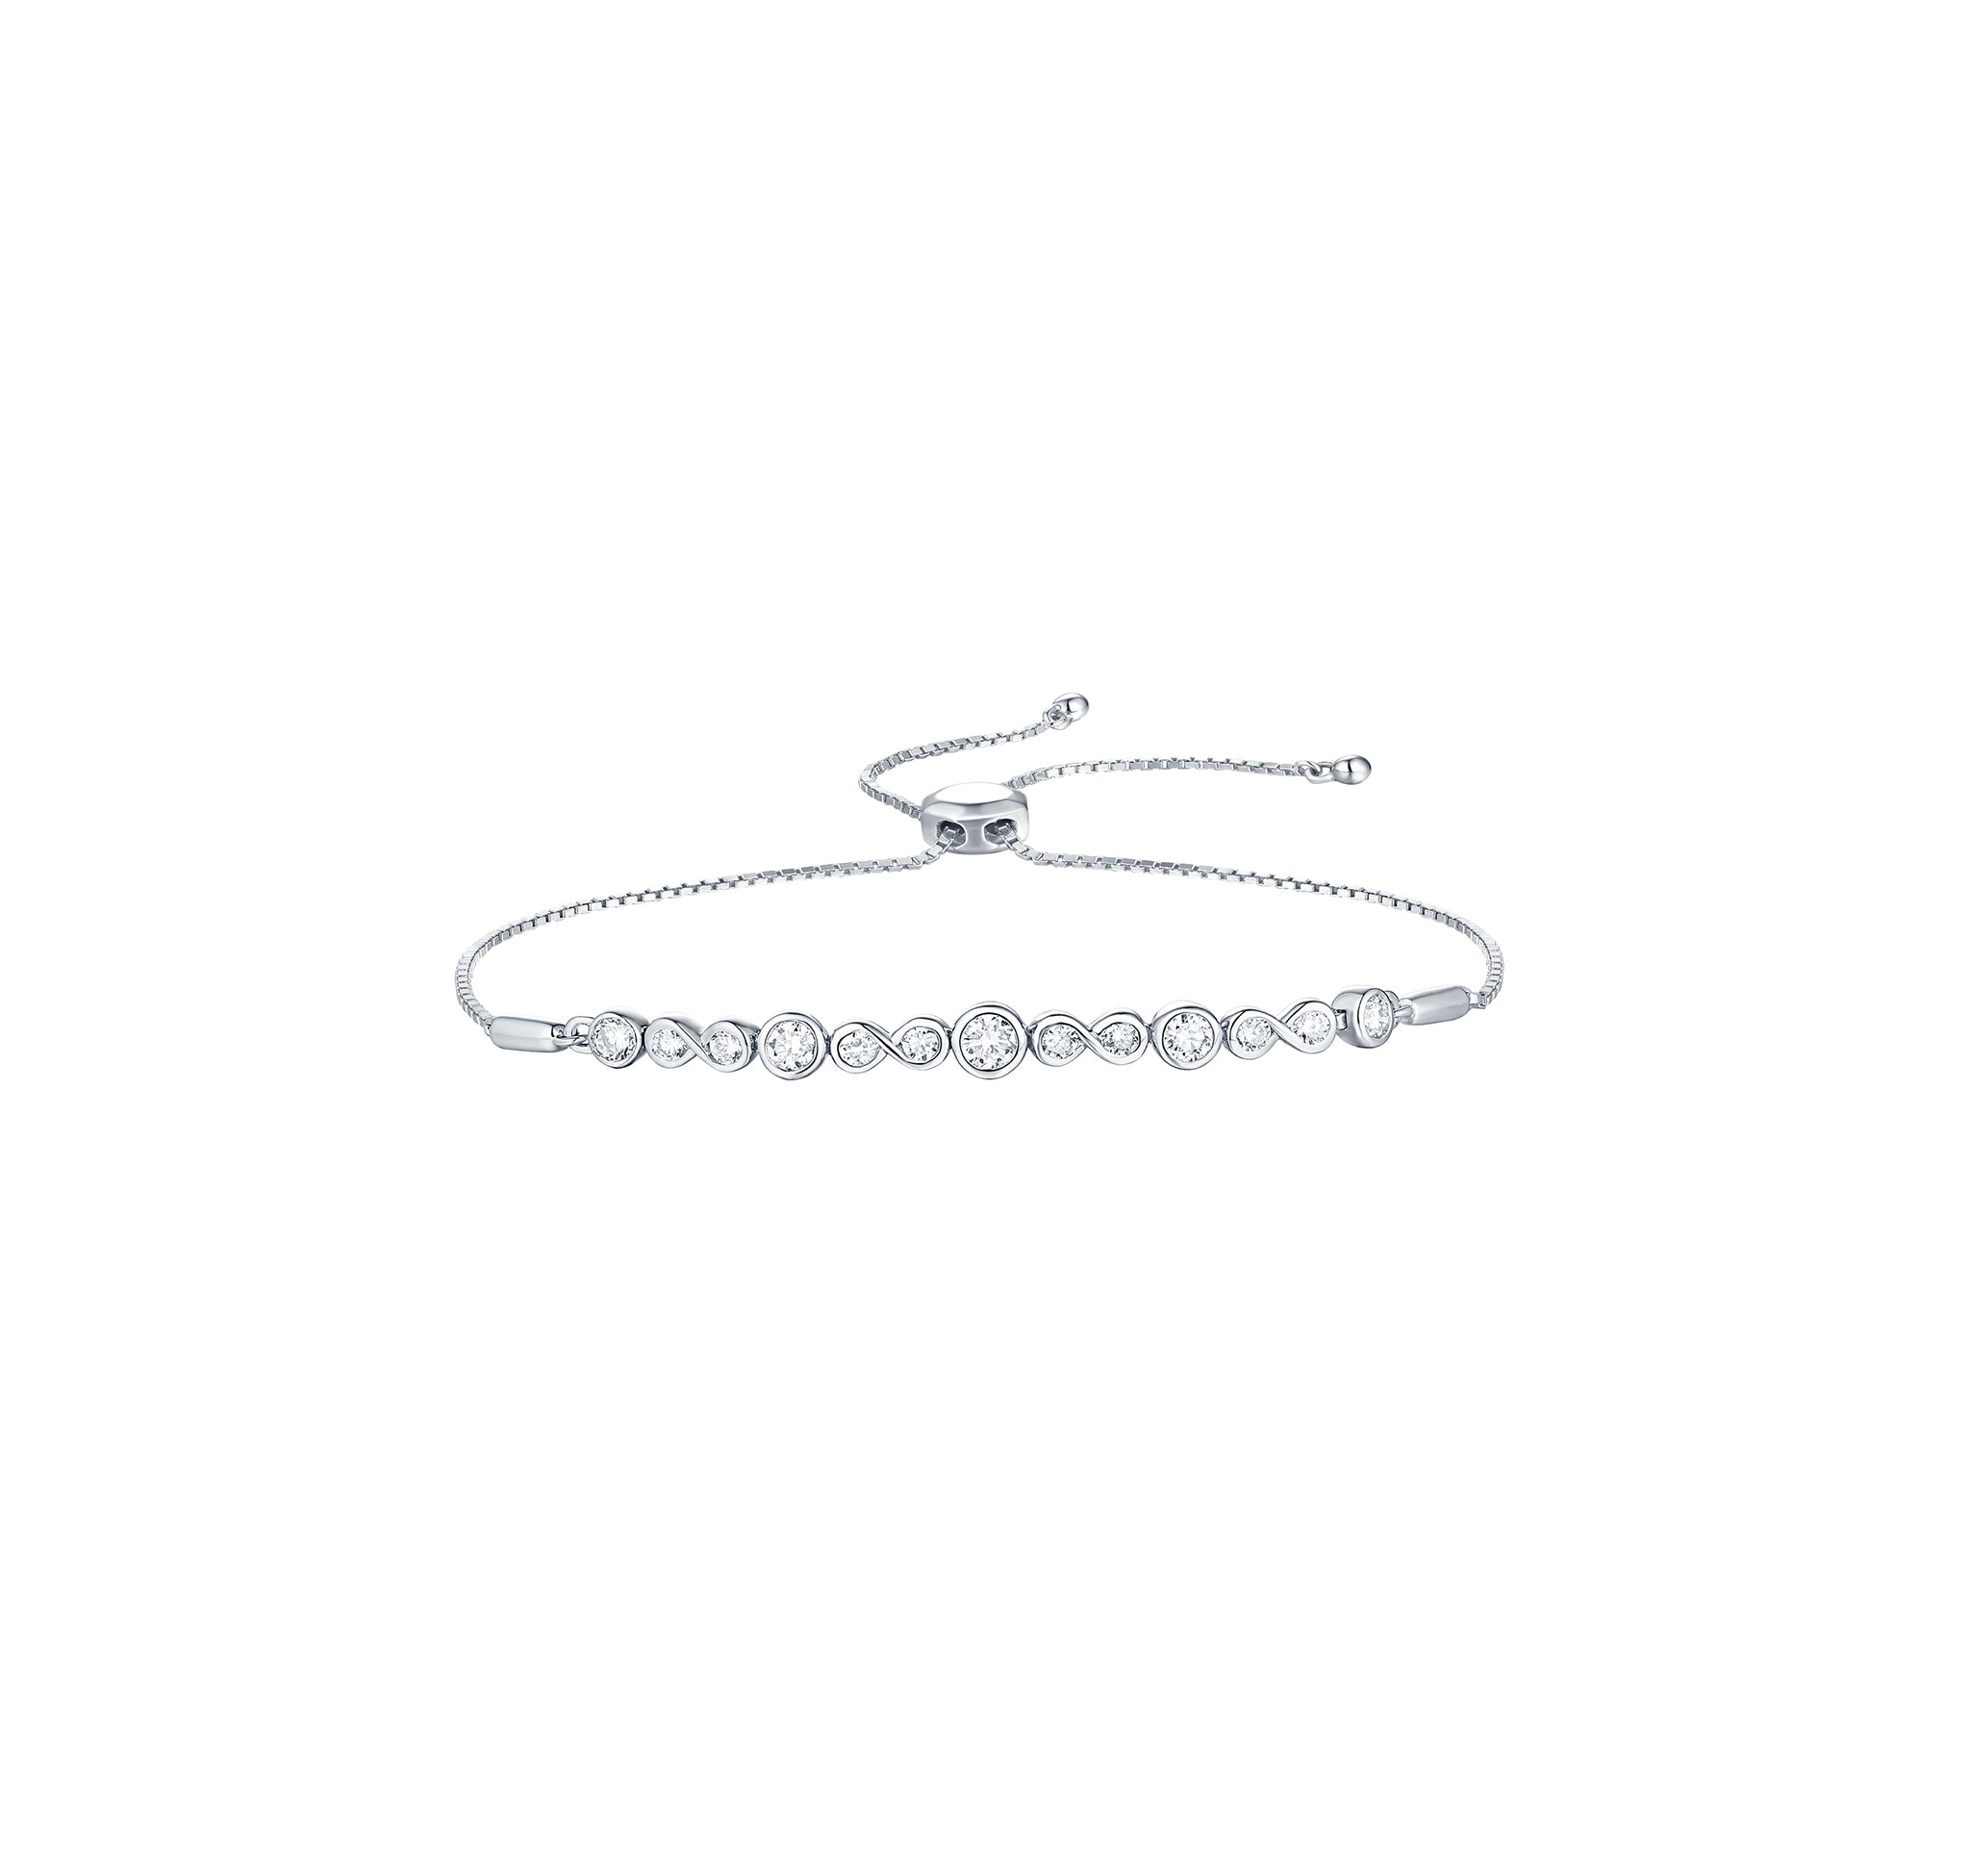 Lab-Created White Sapphire Bar Bolo Bracelet in Sterling Silver - 9.0